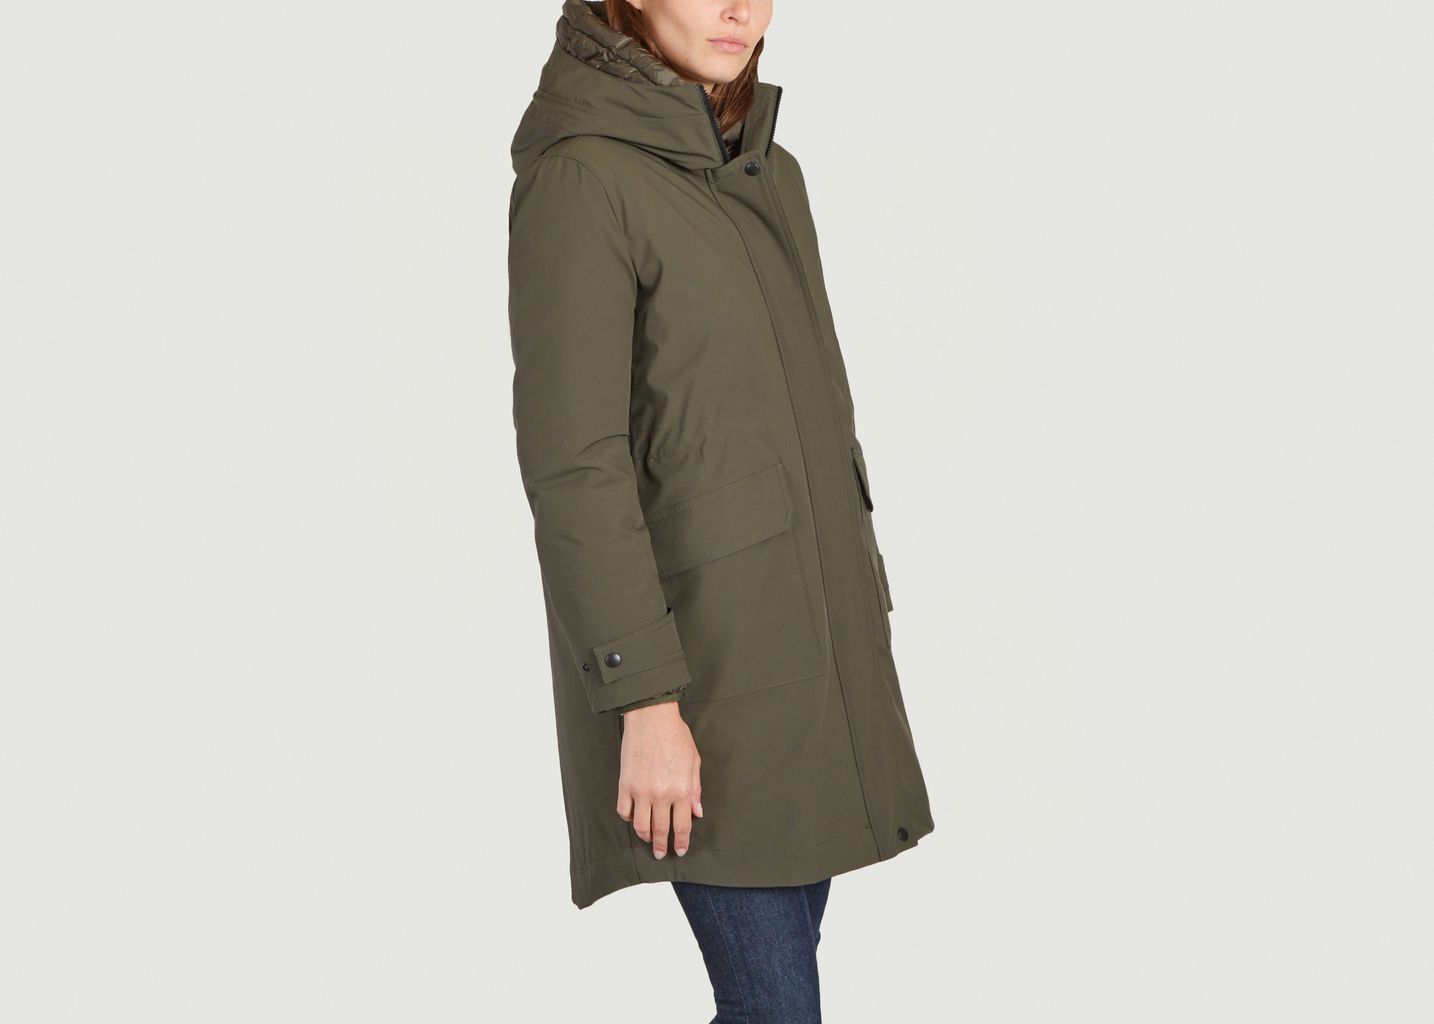 3-in-1 military long parka - Woolrich